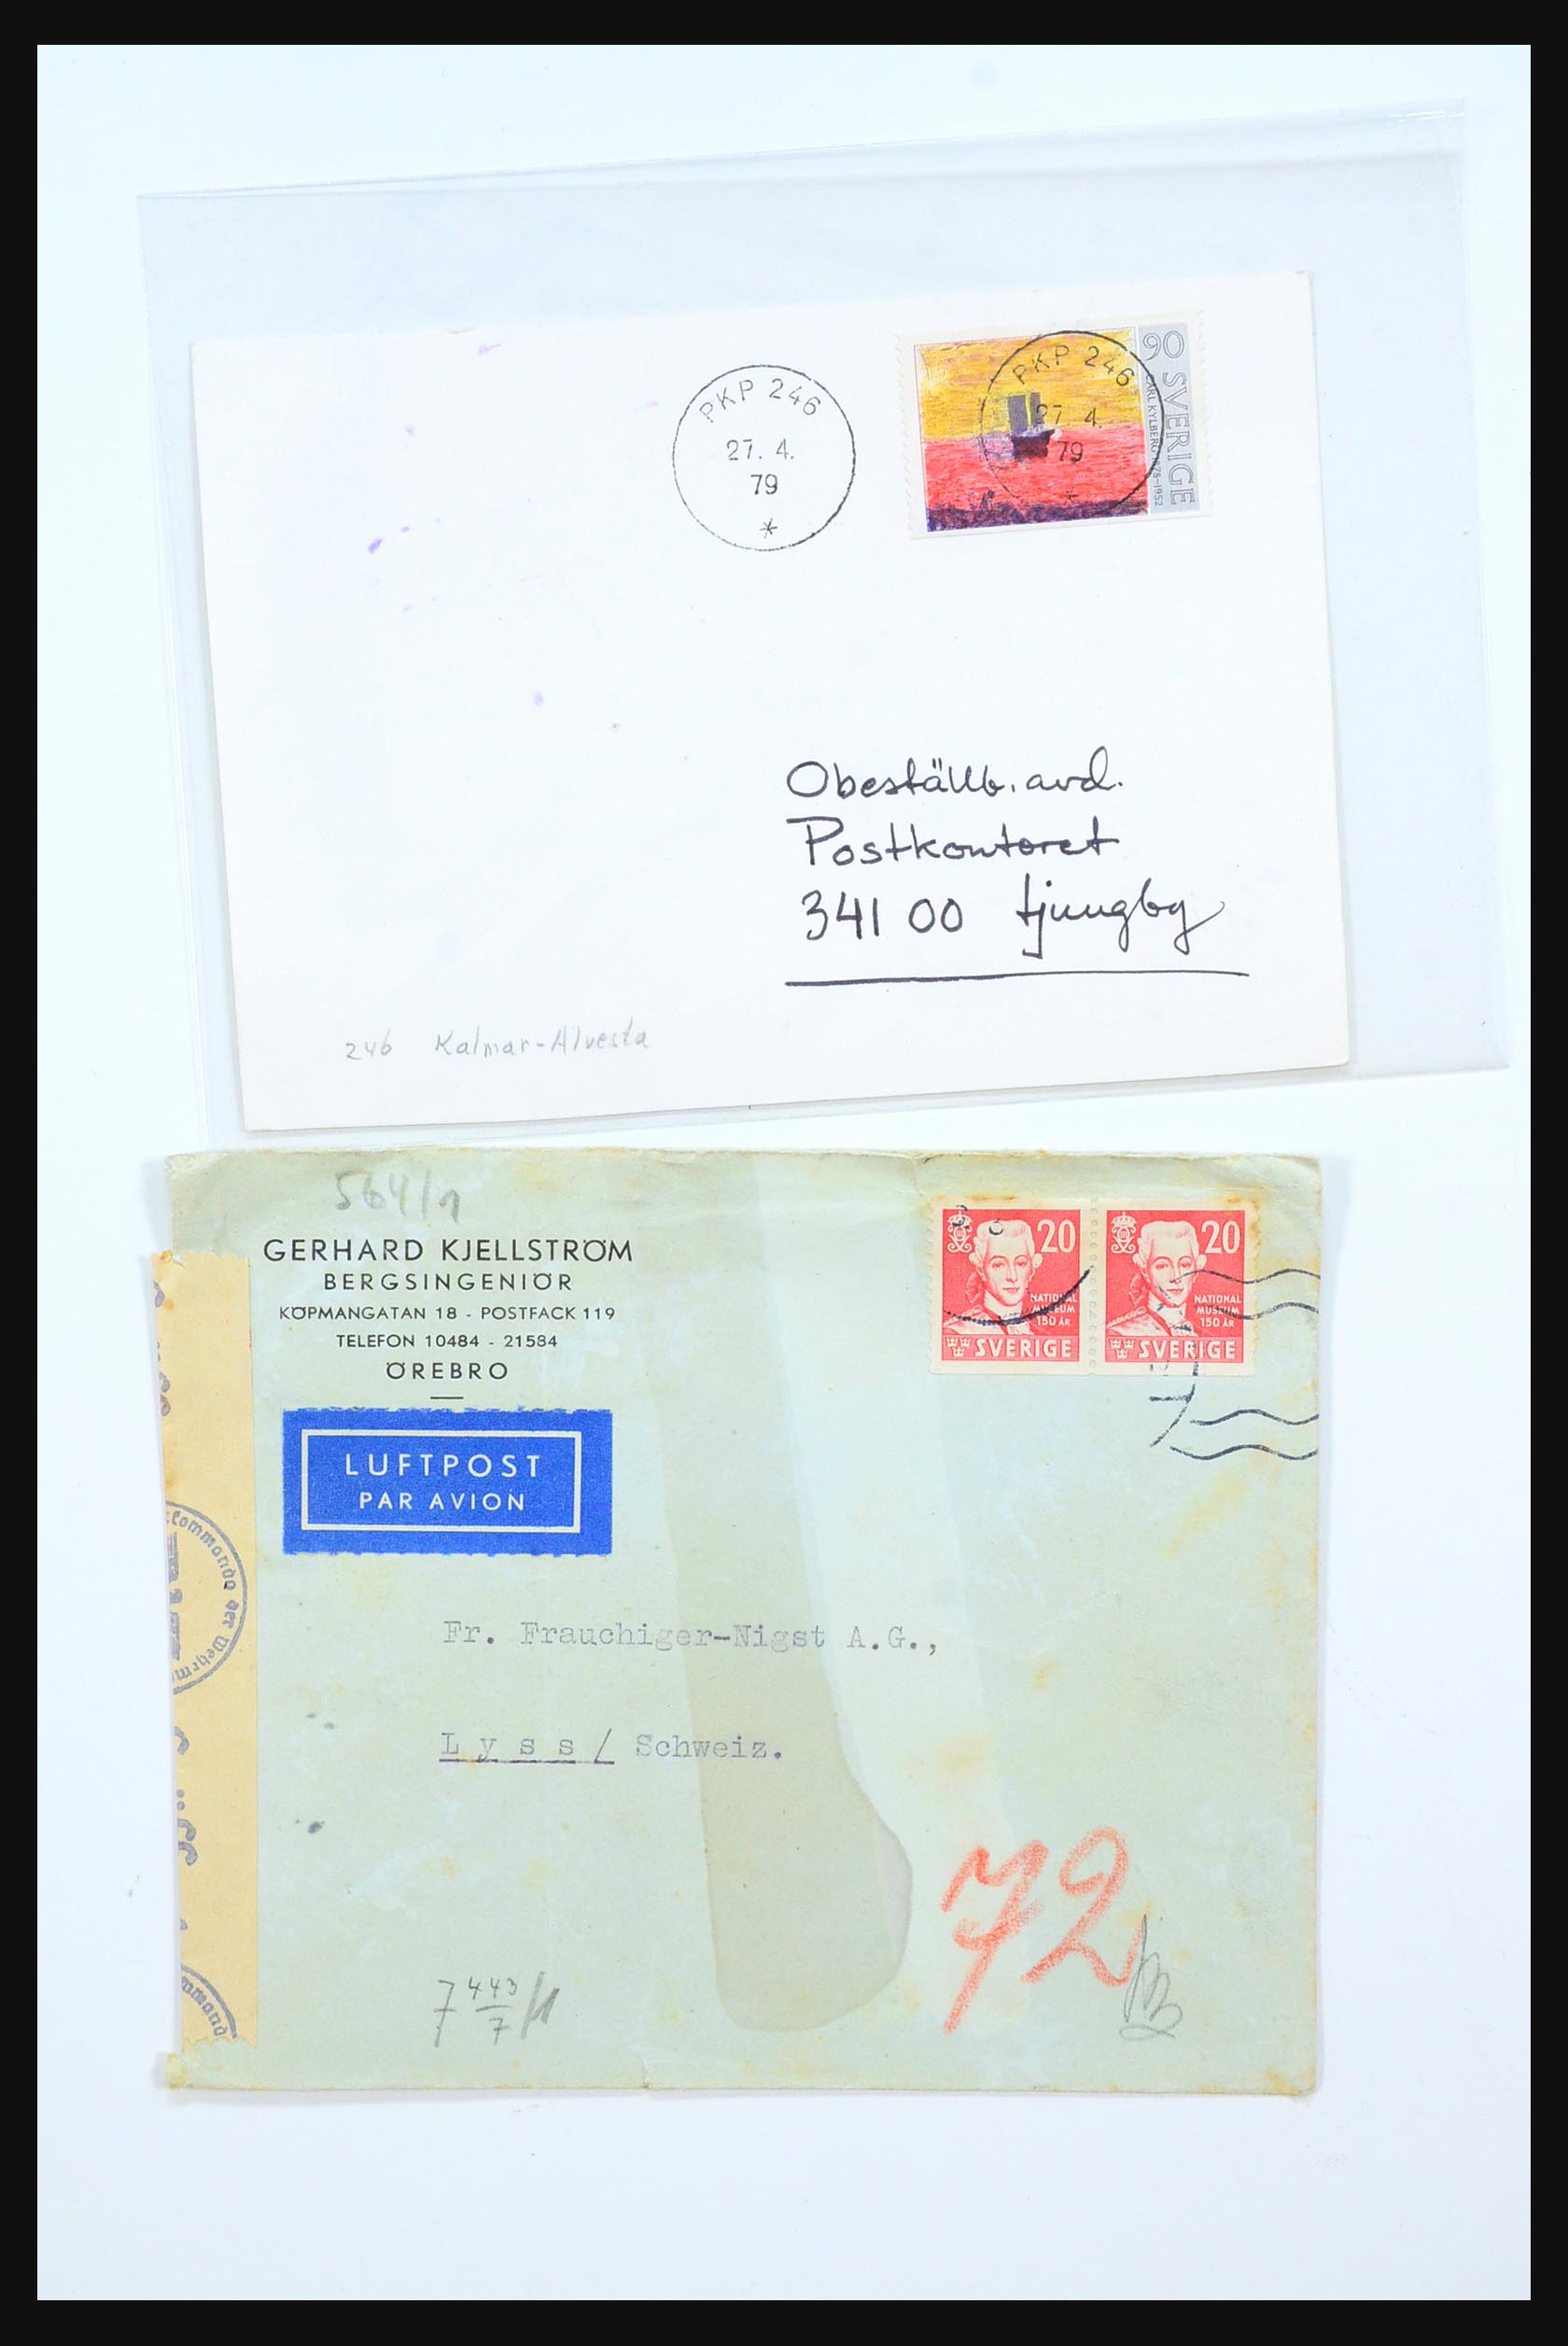 31364 087 - 31364 Sweden covers 1864-1960.